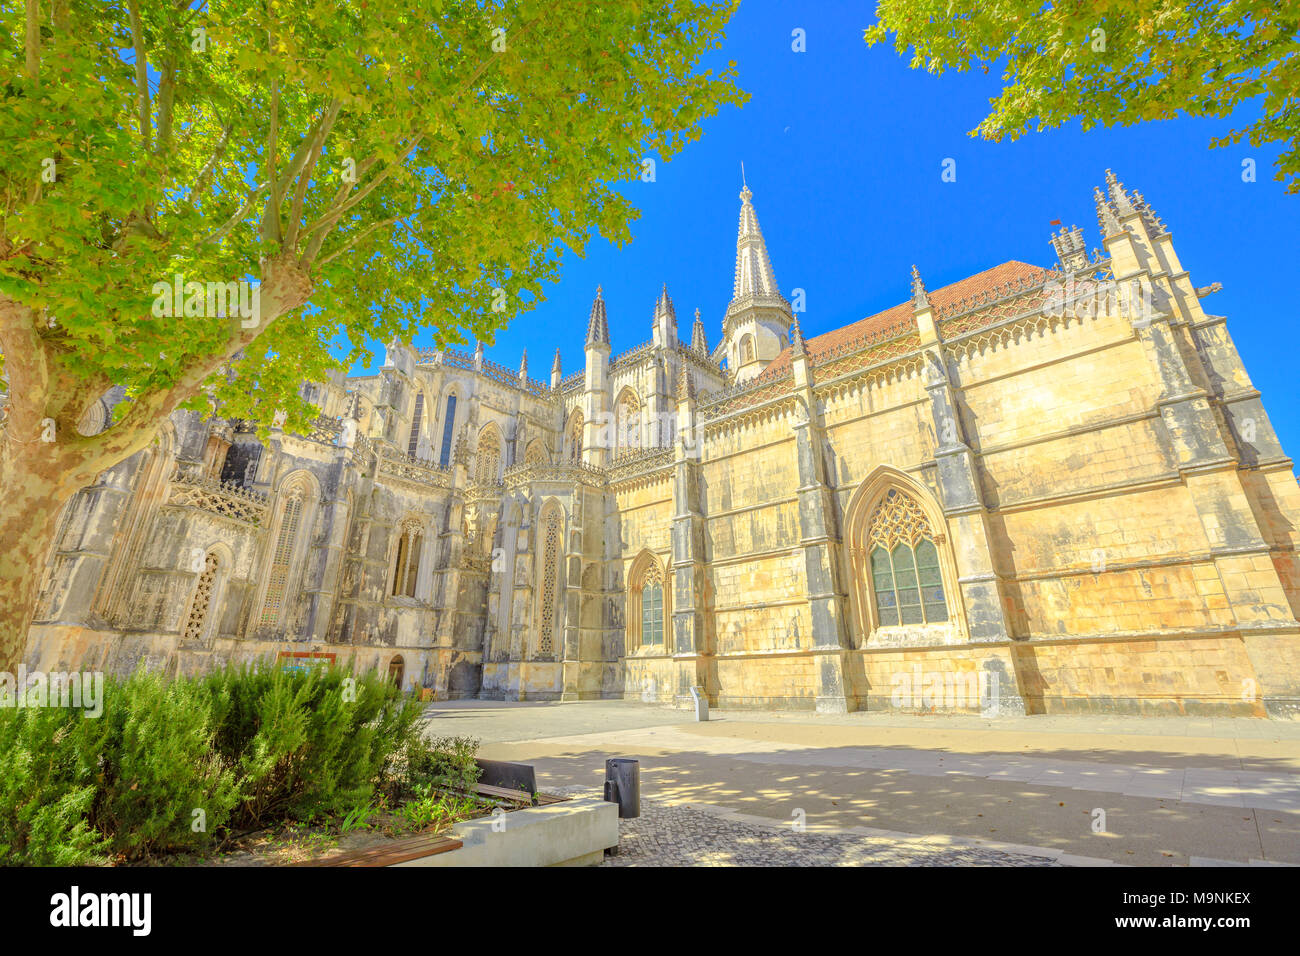 Medieval Batalha Monastery in Gothic and Manueline architecture in Batalha city, central Portugal. Dominican convent of Saint Mary of the Victory popular landmark and Unesco Heritage. Blue sky. Stock Photo